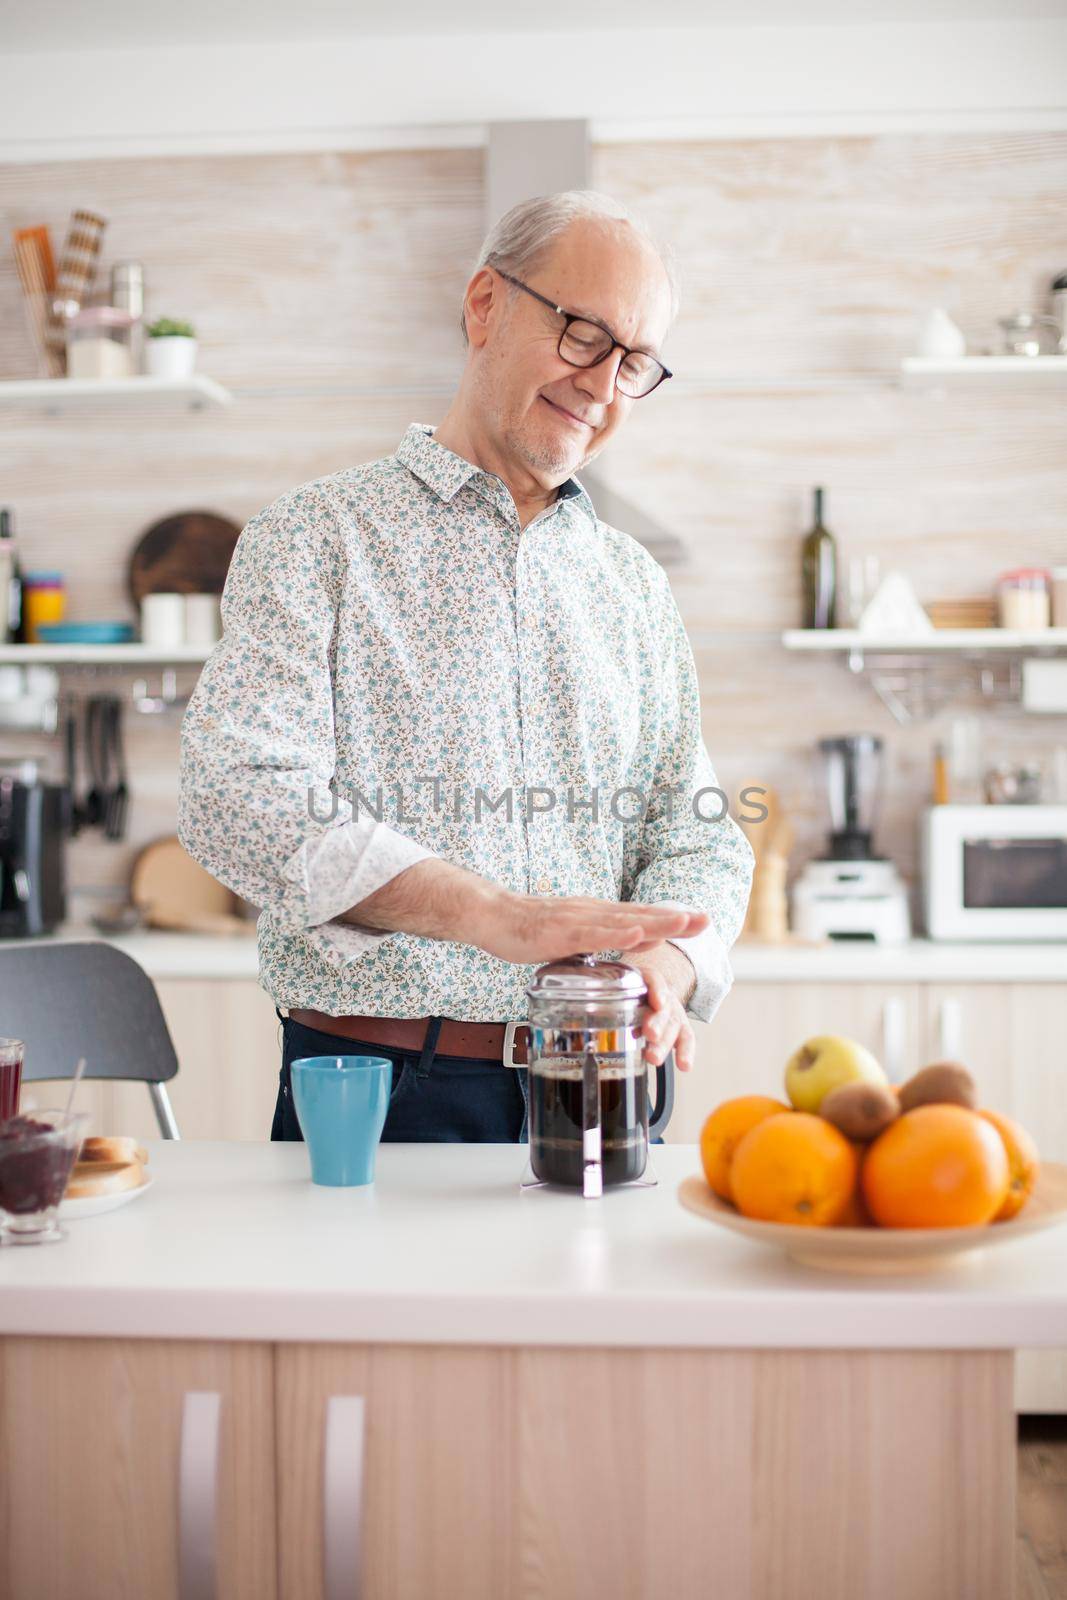 Happy senior man pushing on french press while preparing coffee for breakfast. Elderly person in the morning enjoying fresh brown cafe espresso cup caffeine from vintage mug, filter relax refreshment